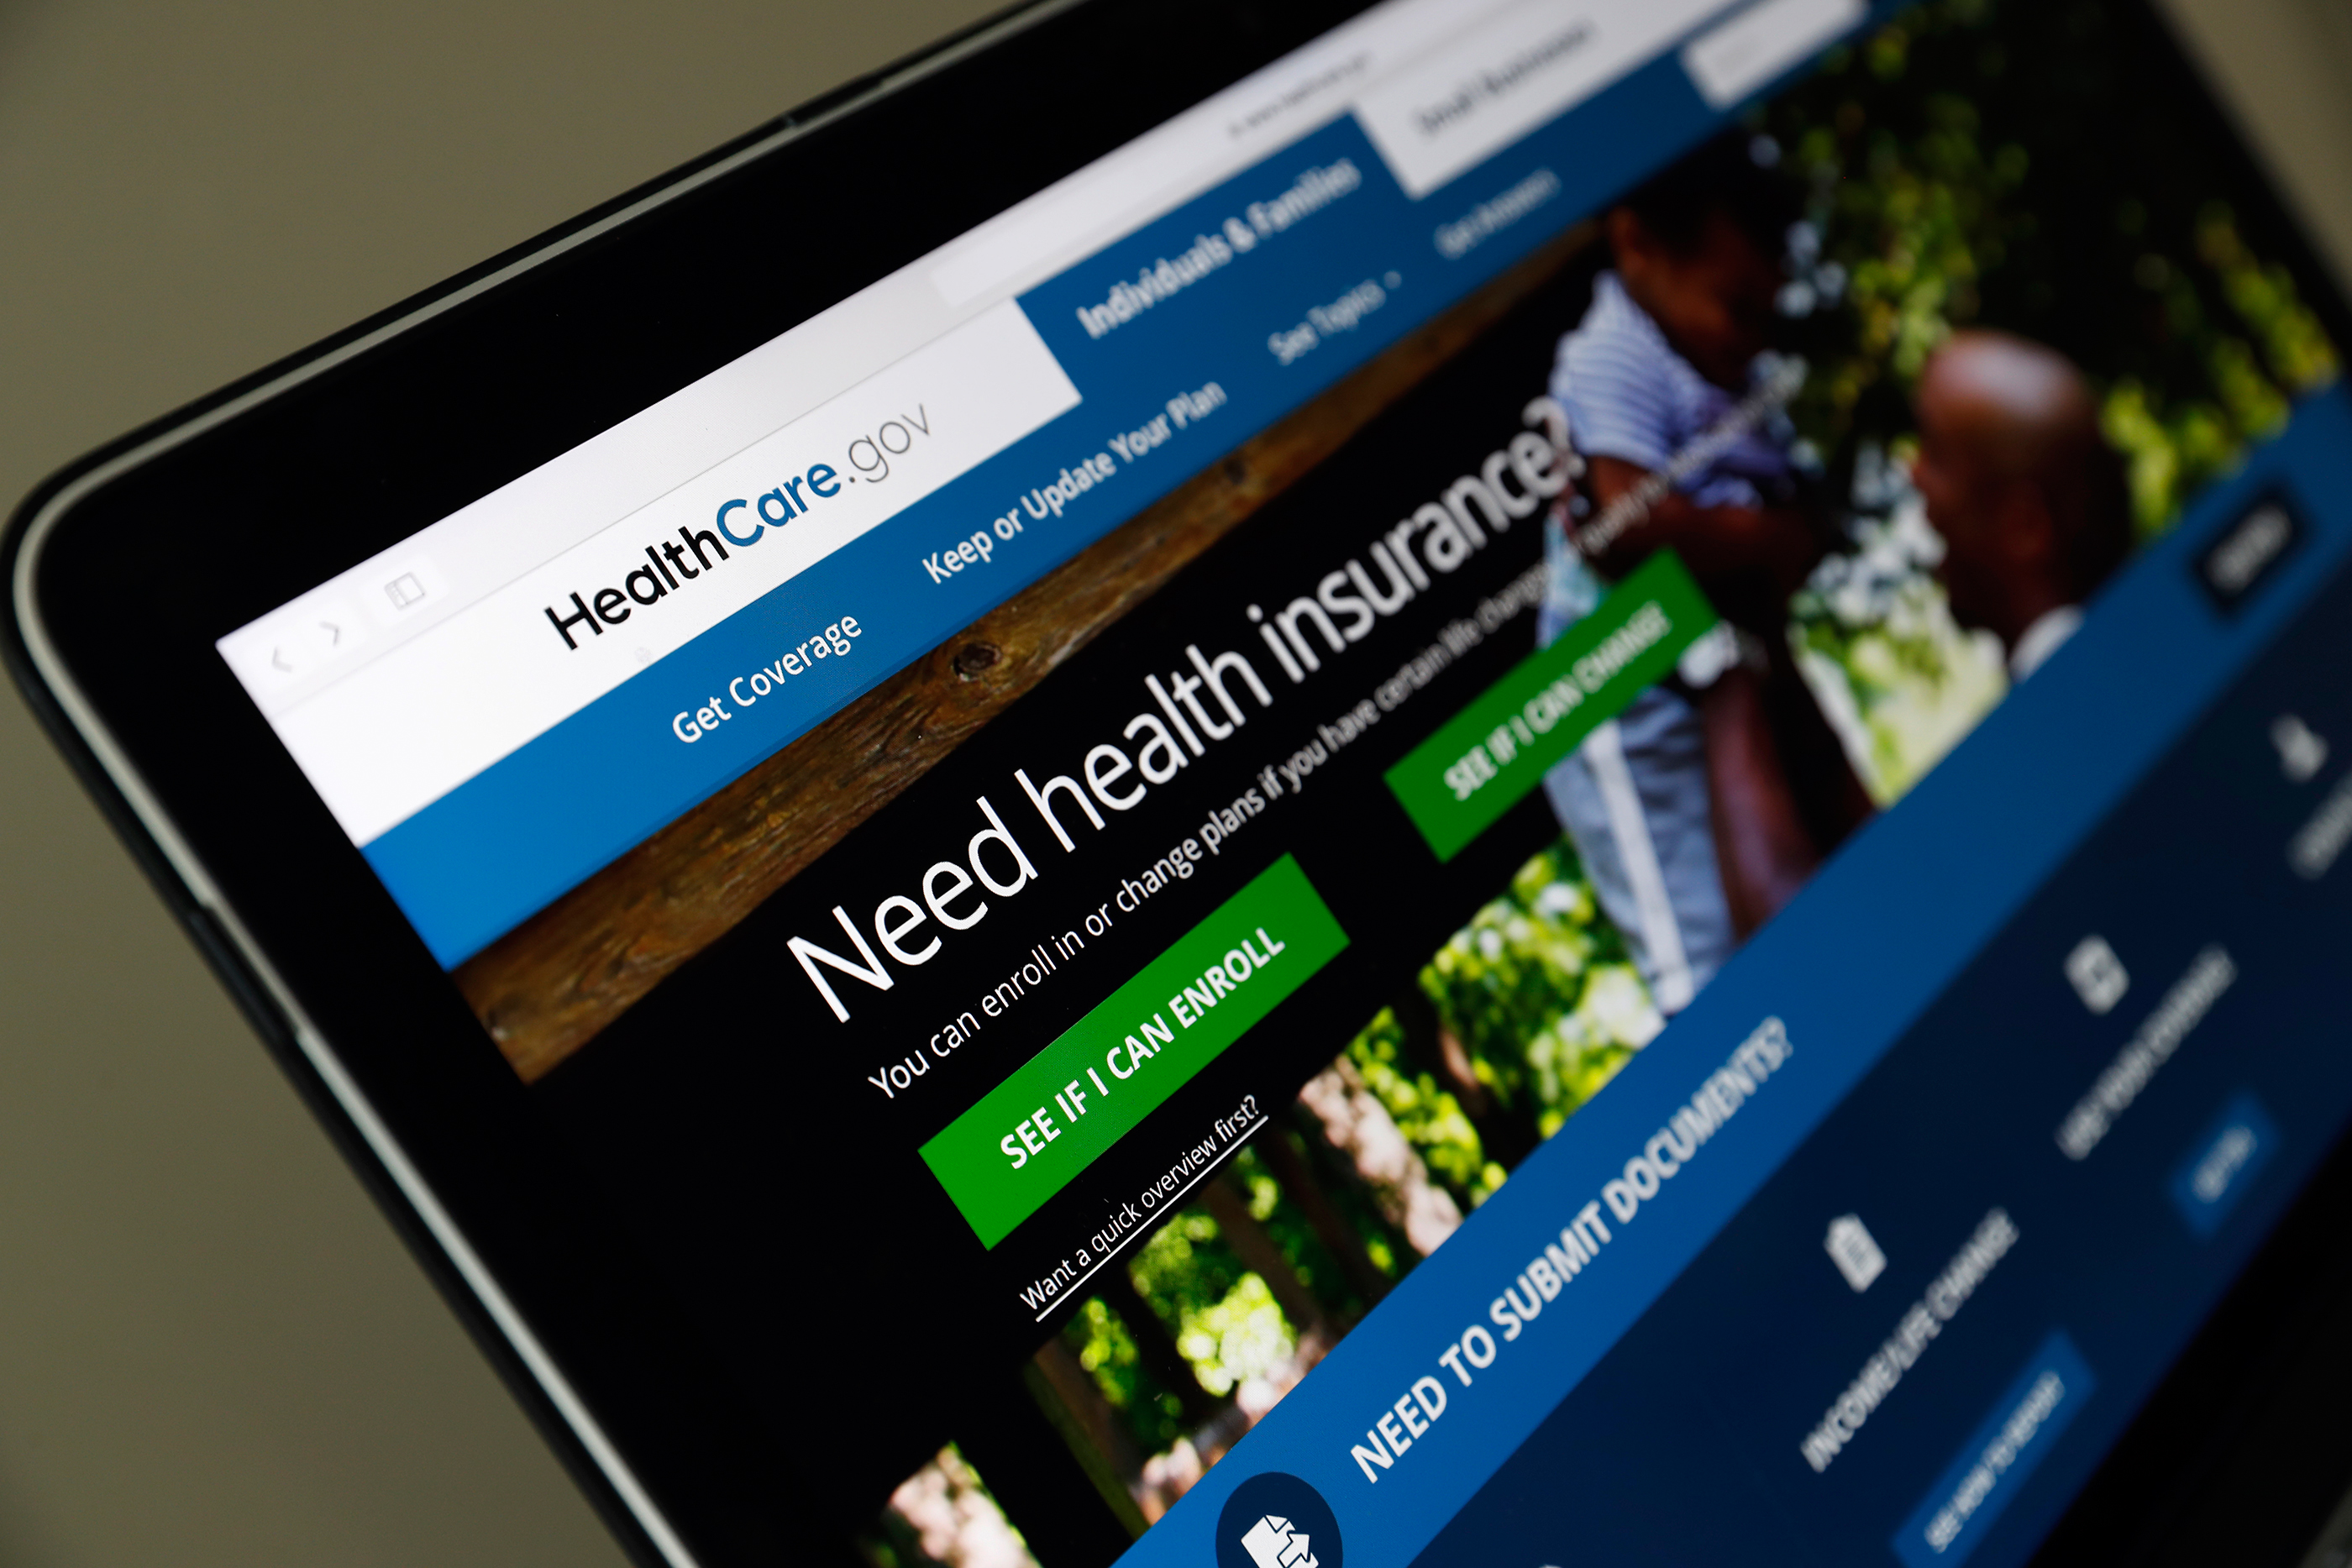 In this May 18, 2017 file photo, the Healthcare.gov website is seen on a laptop computer, in Washington. Former Obama administration officials say they're launching a private campaign to encourage people to sign up for coverage next year under the Affordable Care Act. With the start of open enrollment just weeks away on Nov. 1, the Trump administration has slashed 